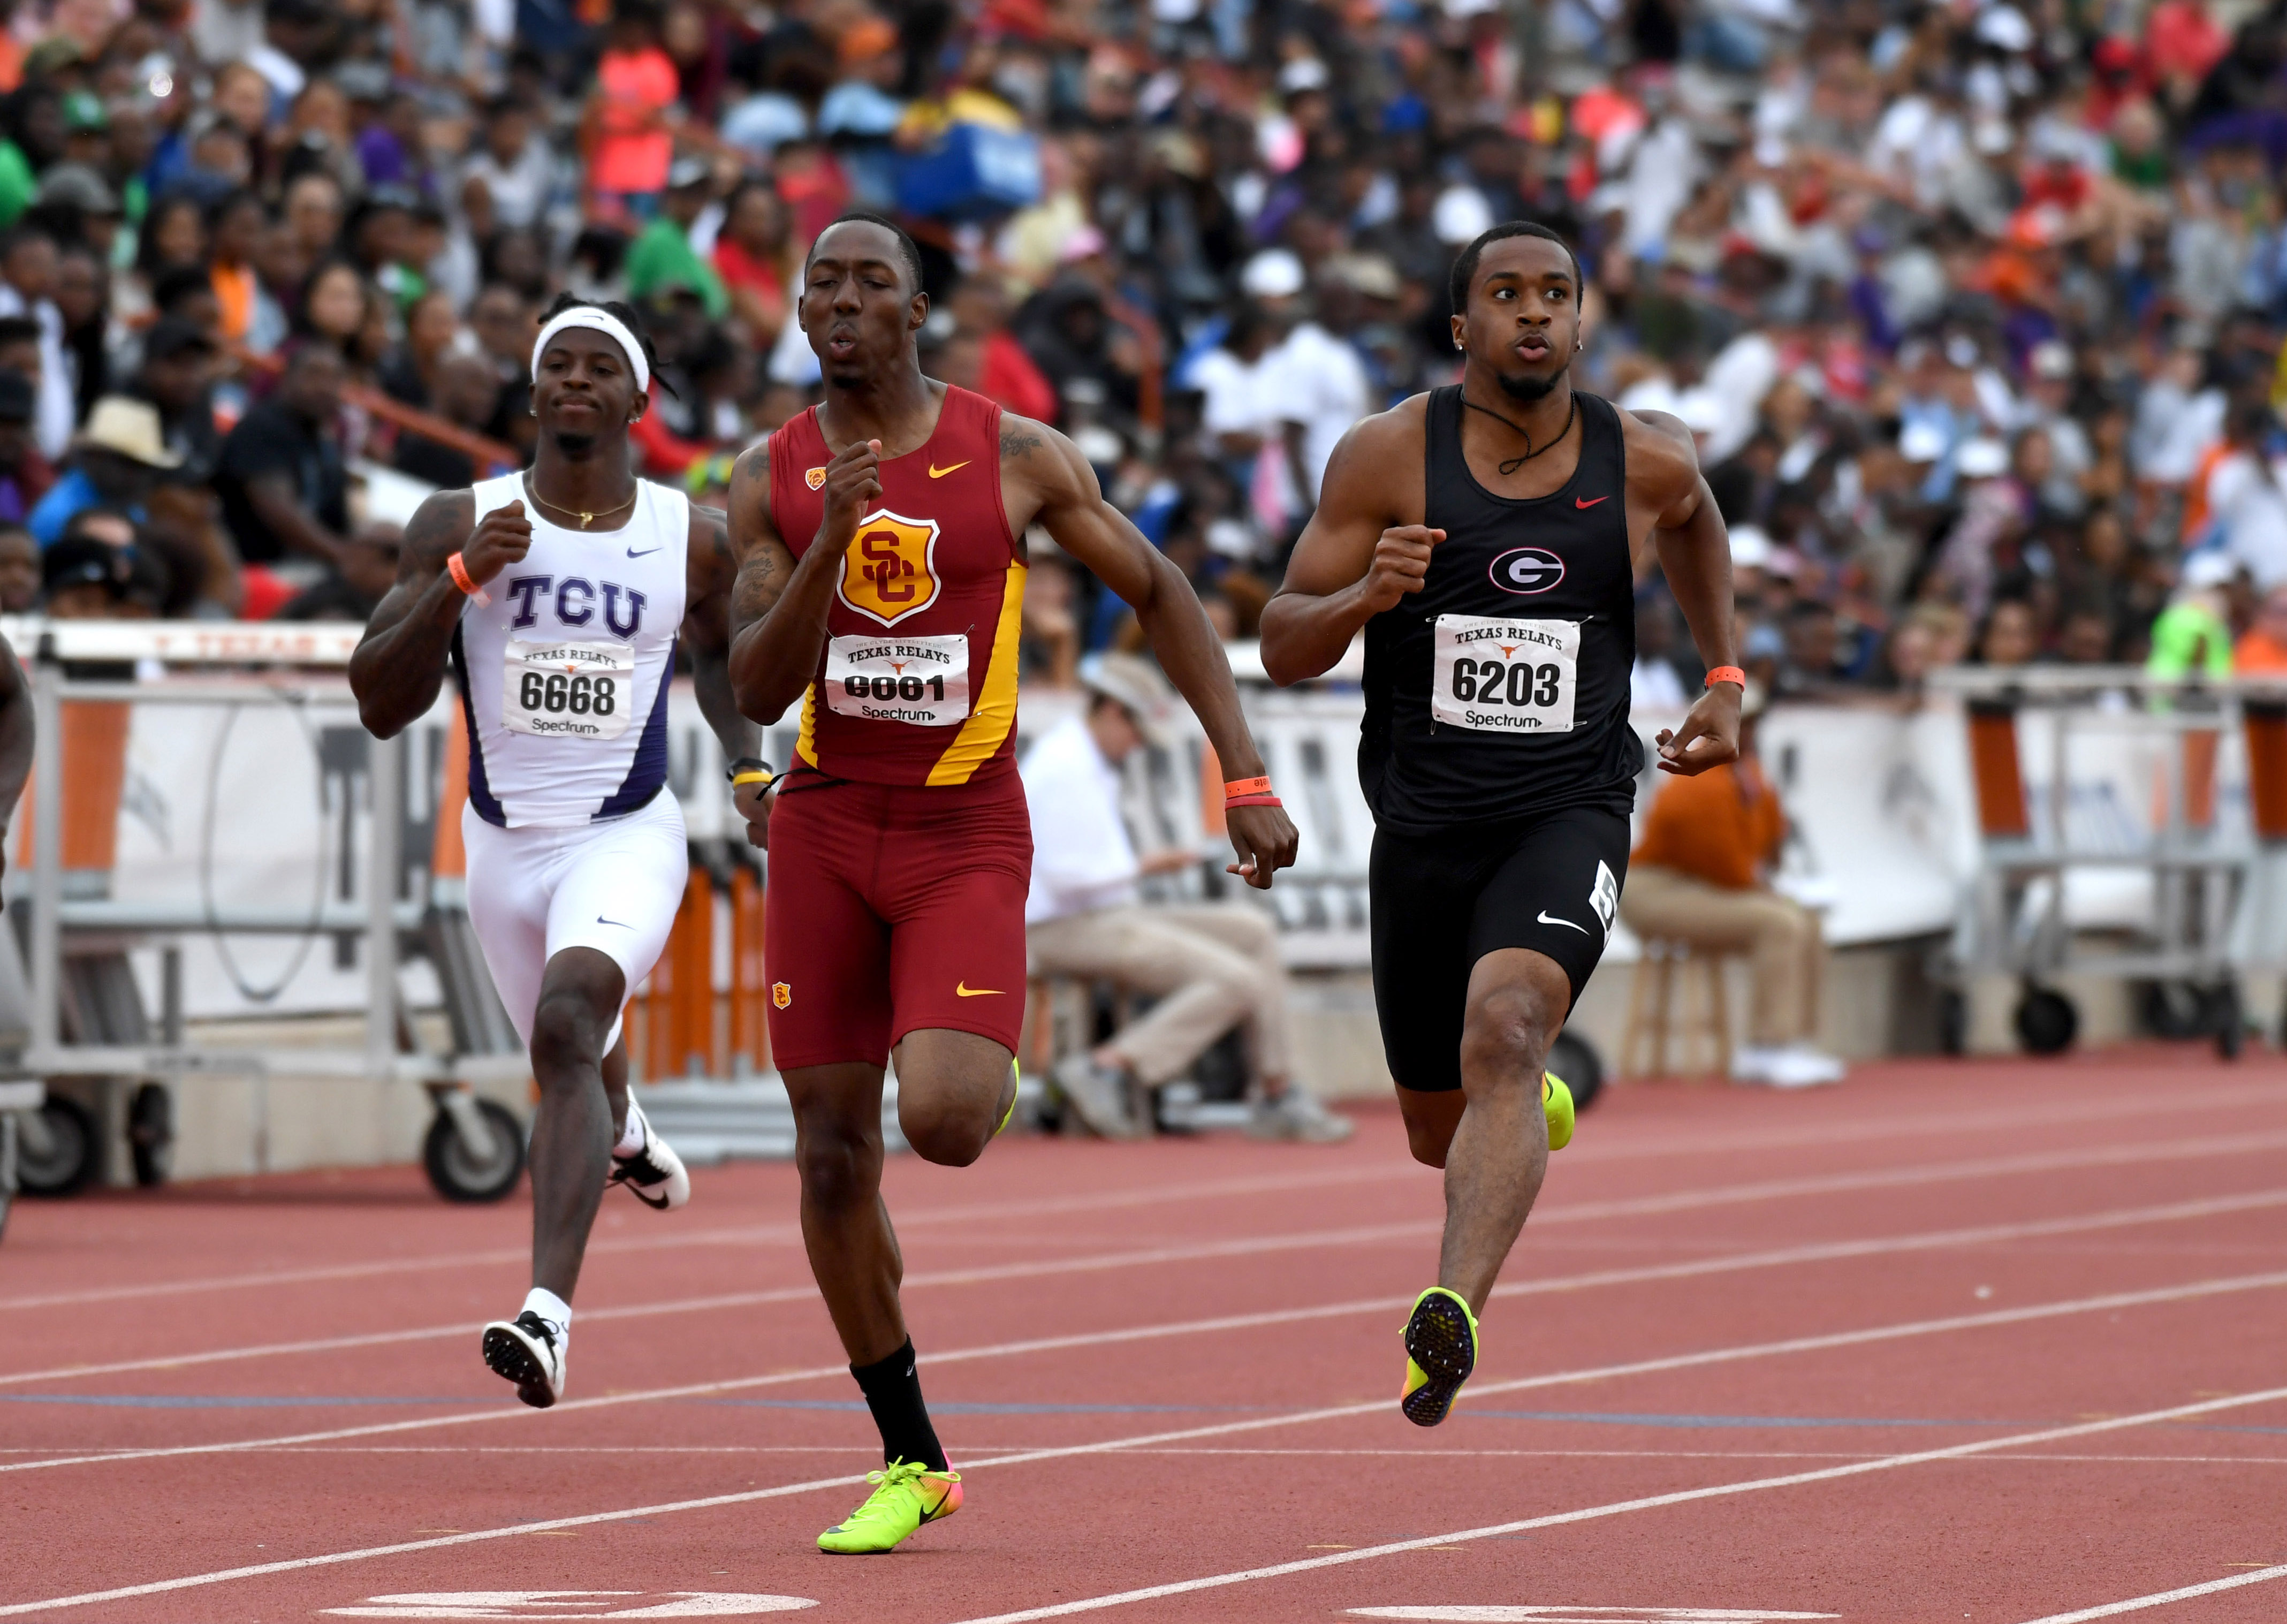 Texas Relays Austin Tx Texas Relays Austin Tx 2019 Youtube State of